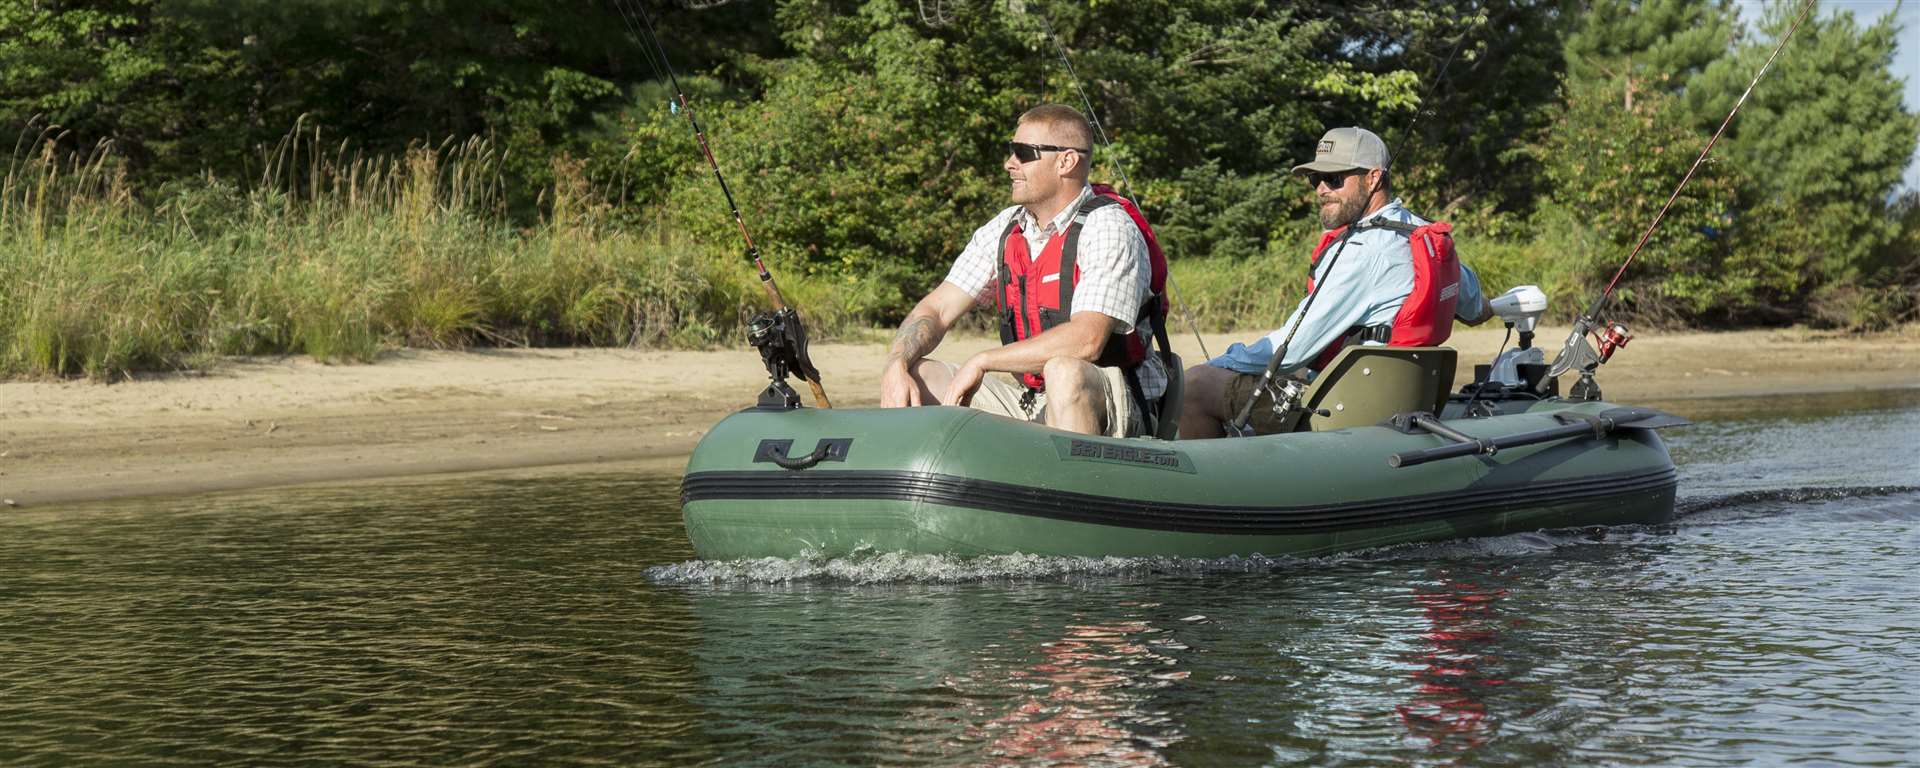 SeaEagle Frameless Pontoon Boat Packages Sea Eagle - 4 Person 10'1" Green Stealth Stalker 10 Inflatable Frameless Fishing Boat Package ( STS10K_P )